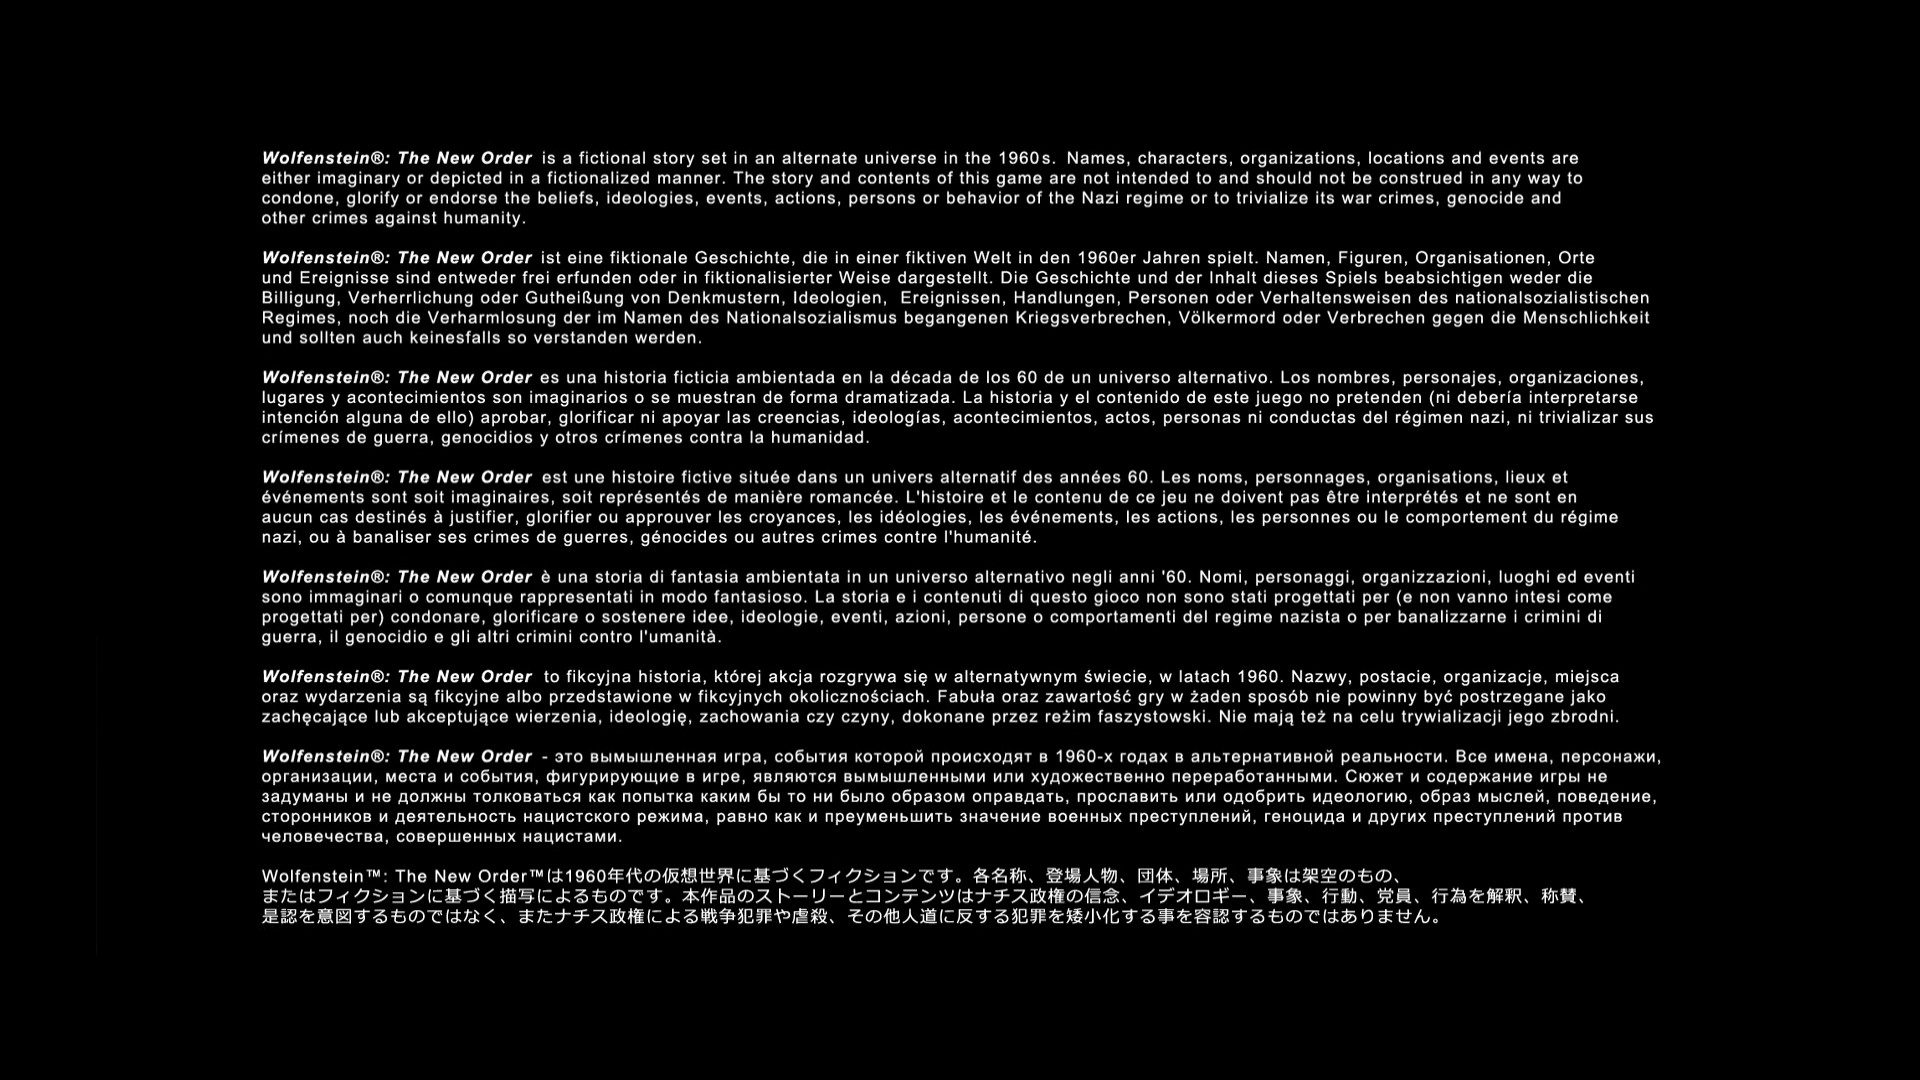 Wolfenstein: The New Order - All Enigma Codes at a glance